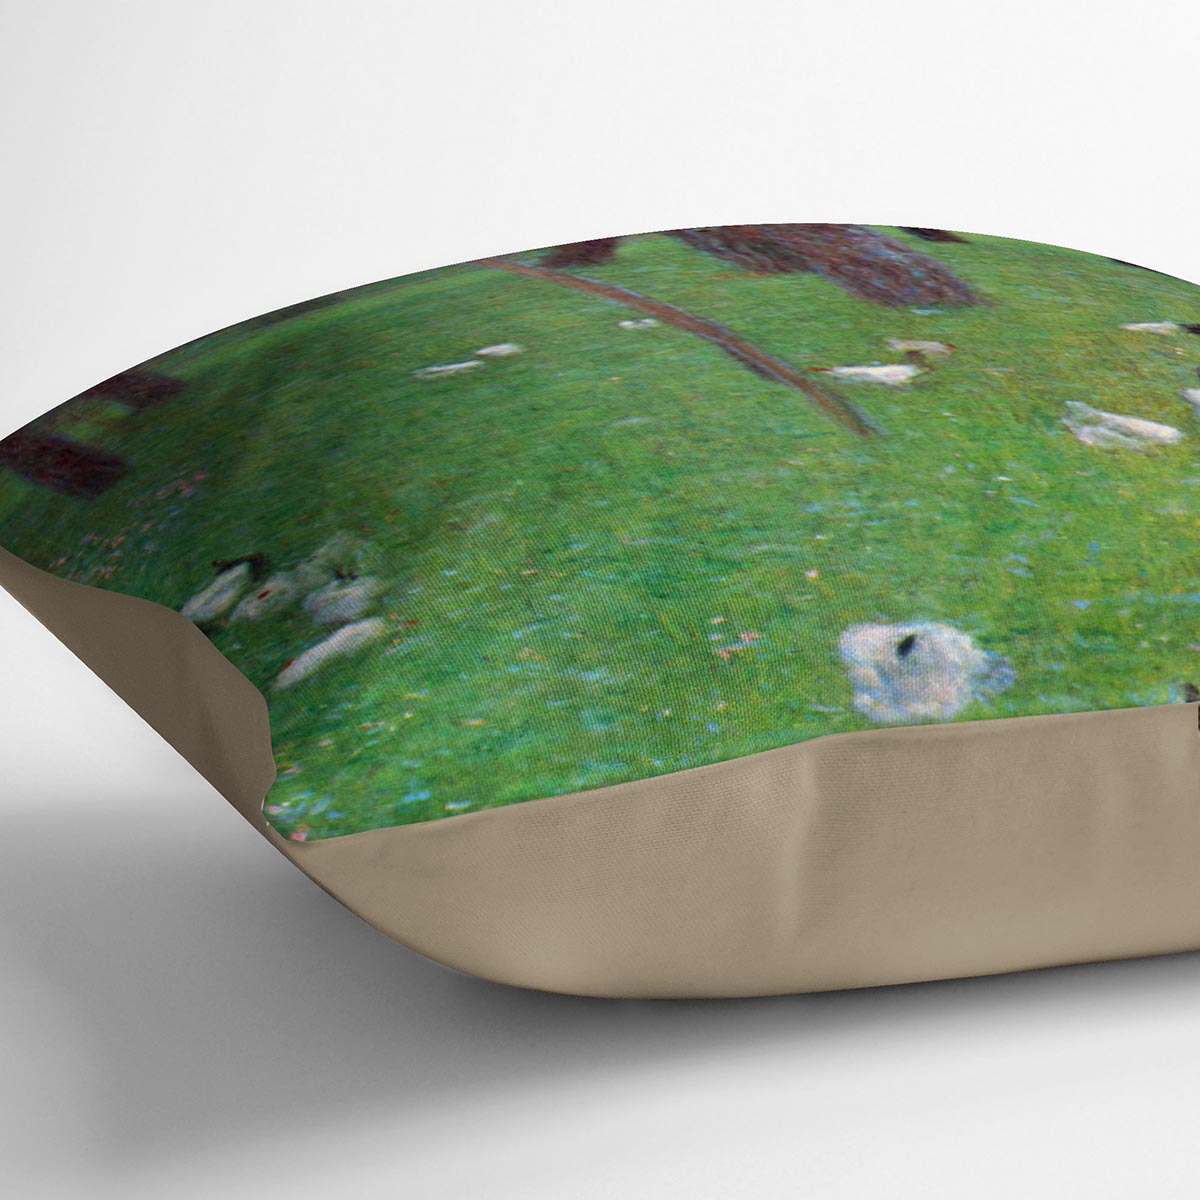 After the rain garden with chickens in St. Agatha by Klimt Cushion